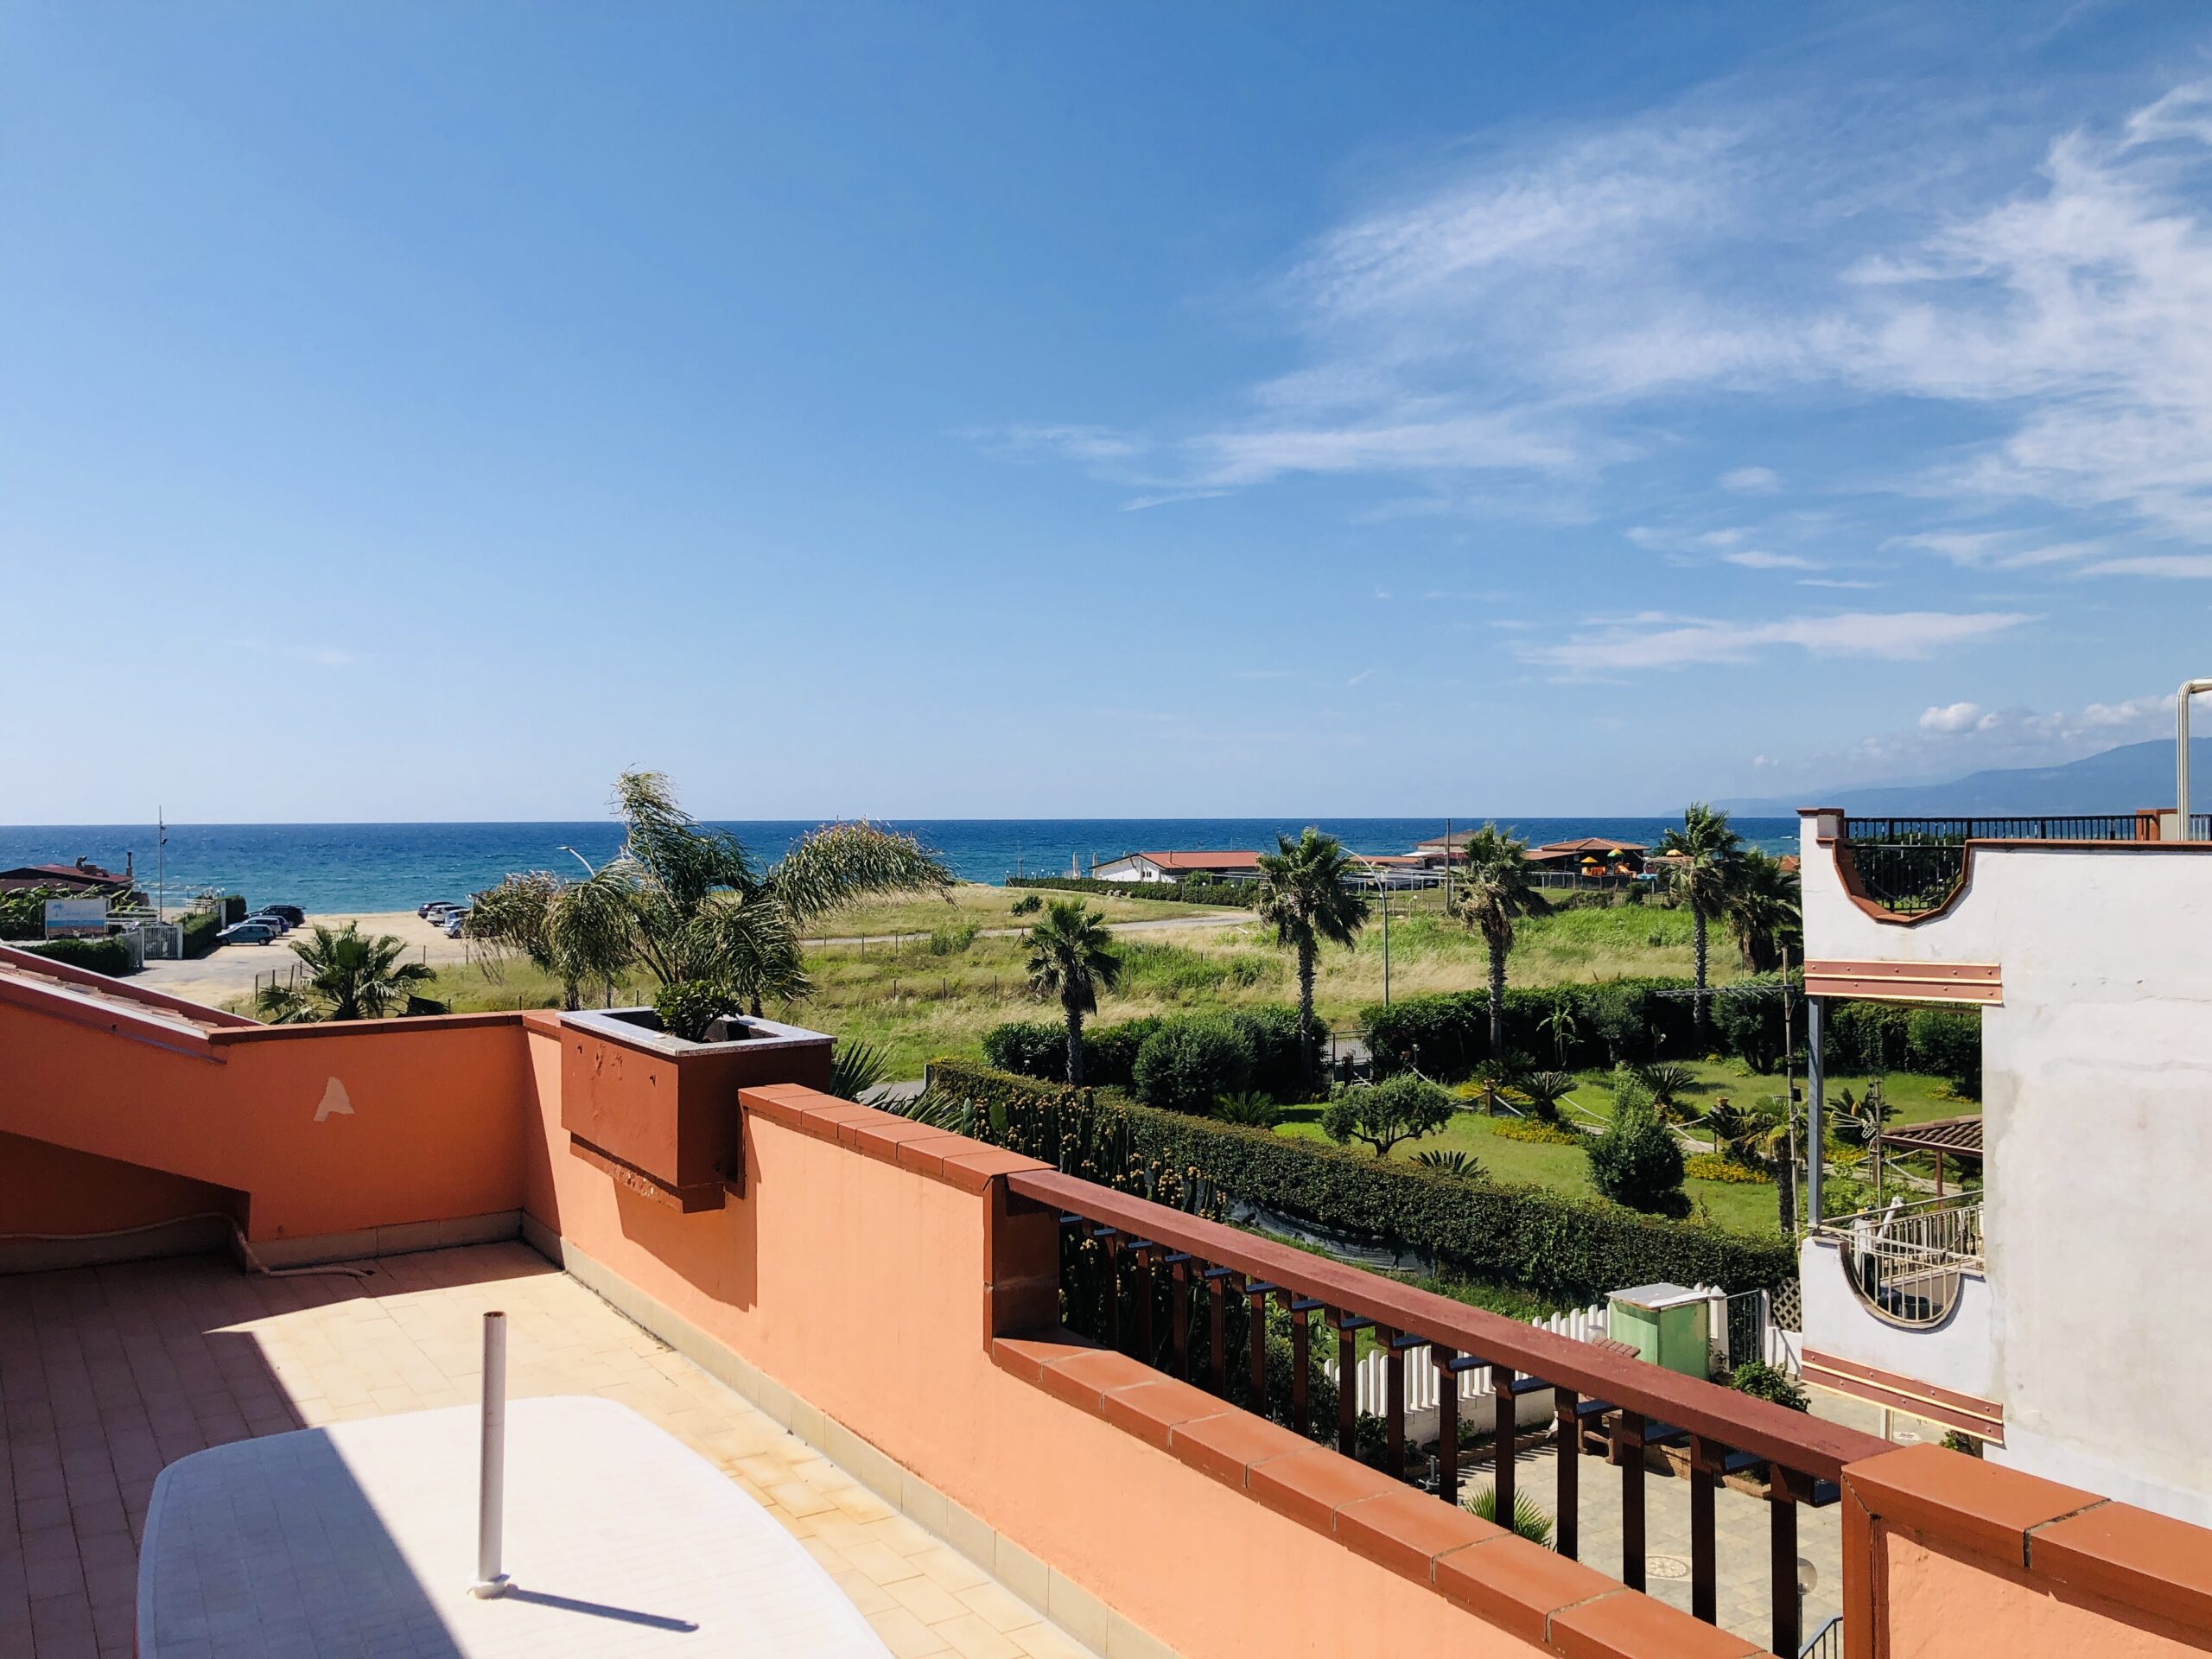 Penthouse apartment for sale located in Marinella Pizzo Calabria with sea views